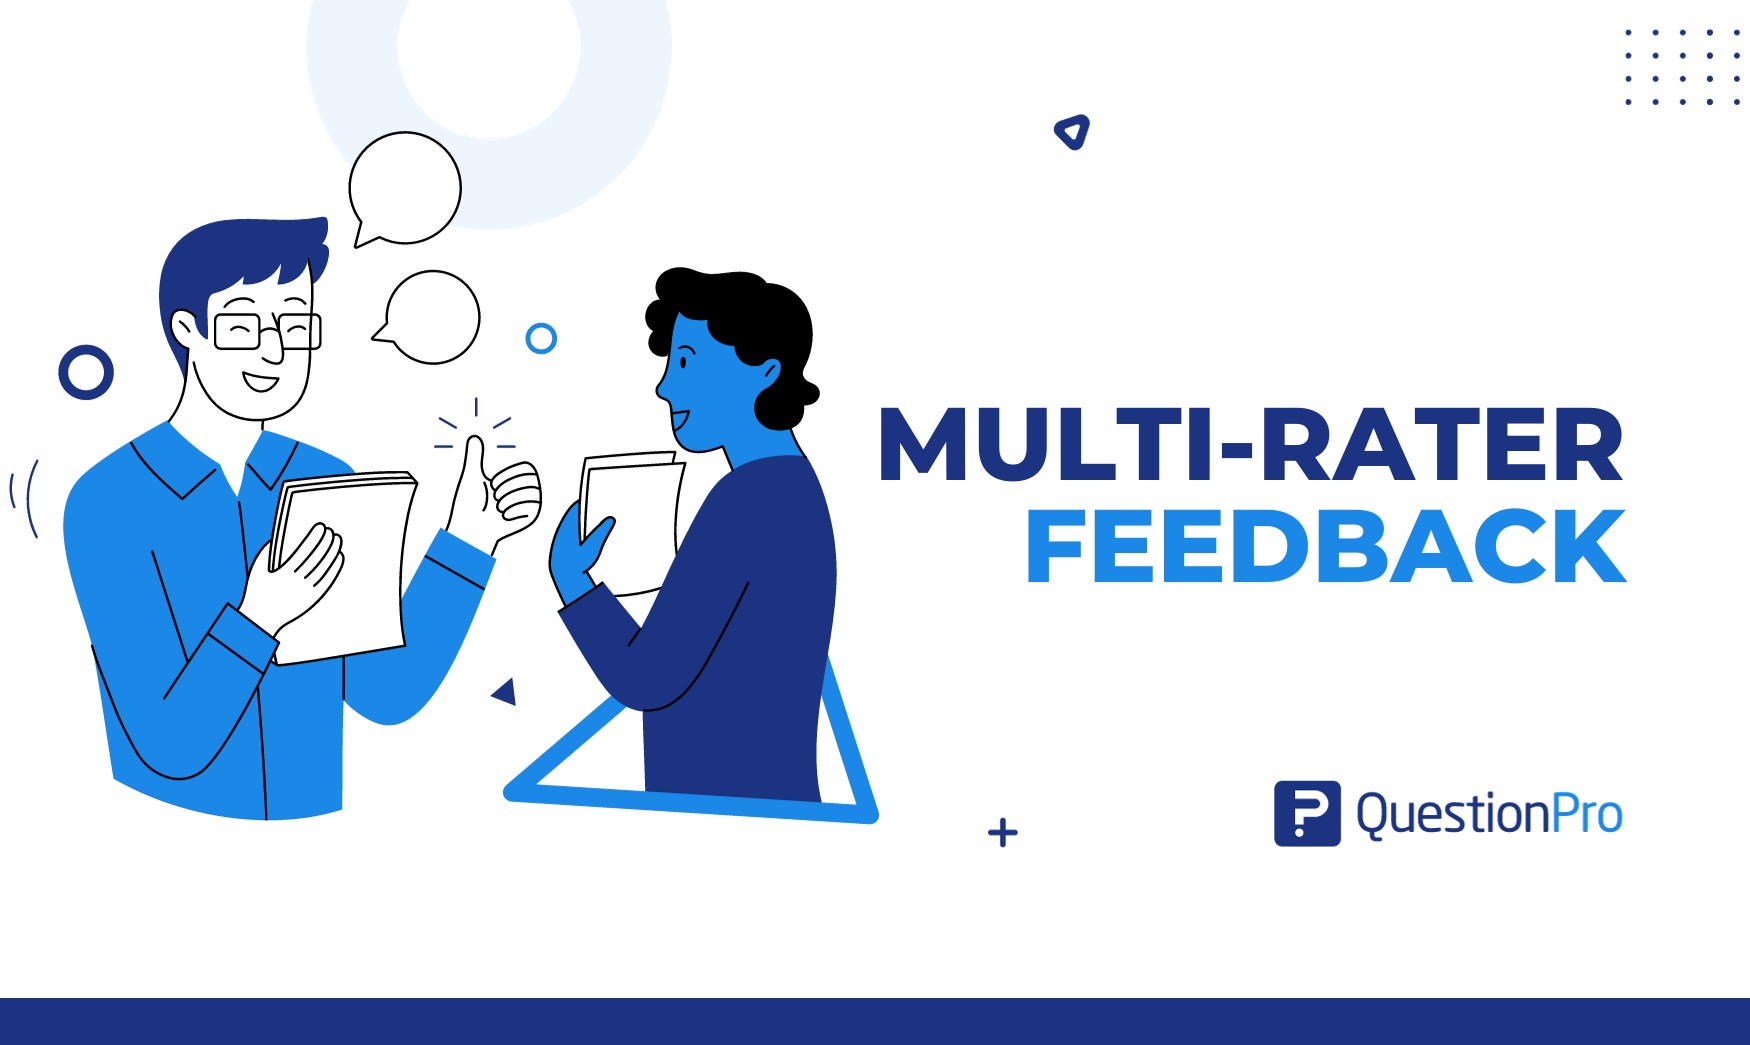 Multi-rater feedback is a performance assessment tool that collects employee feedback. Discover more impactful performance management.